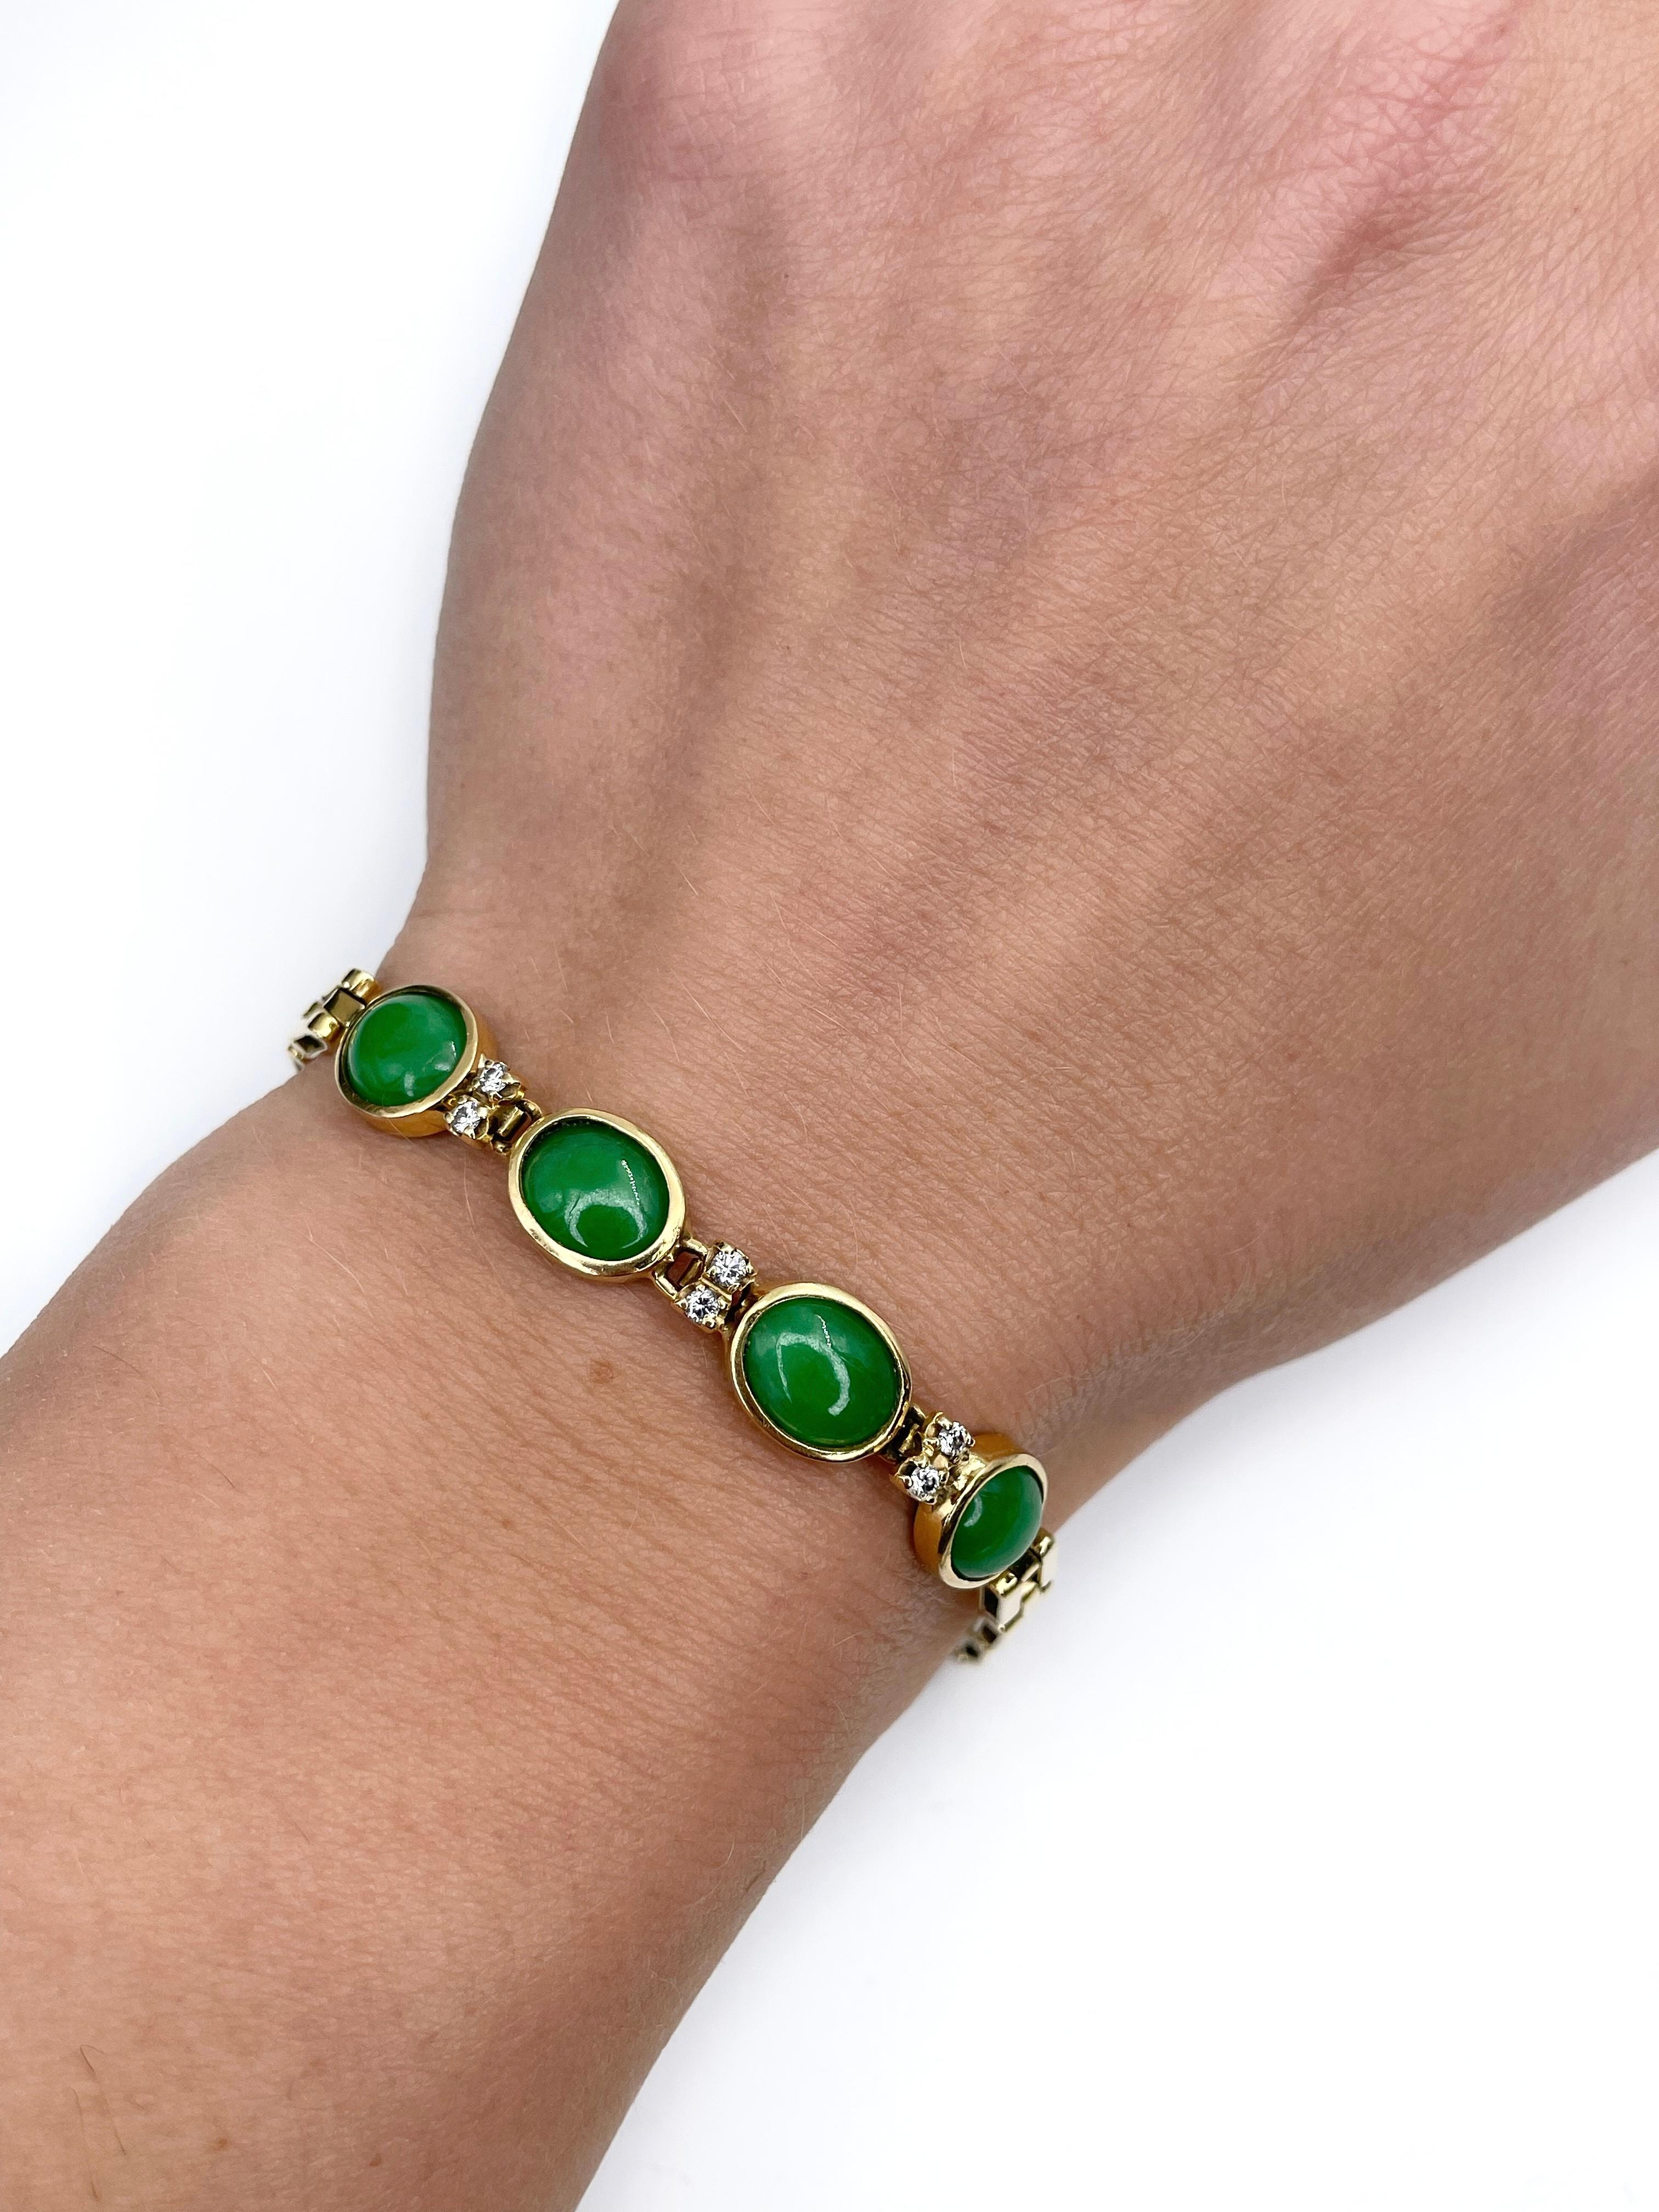 This is a beautiful vintage chain bracelet crafted in 18K yellow gold. Circa 1950. The piece features 4 cabochon cut apple green jades and 6 brilliant cut diamonds.

Weight: 14.99g
Length: 18.5cm

———

If you have any questions, please feel free to